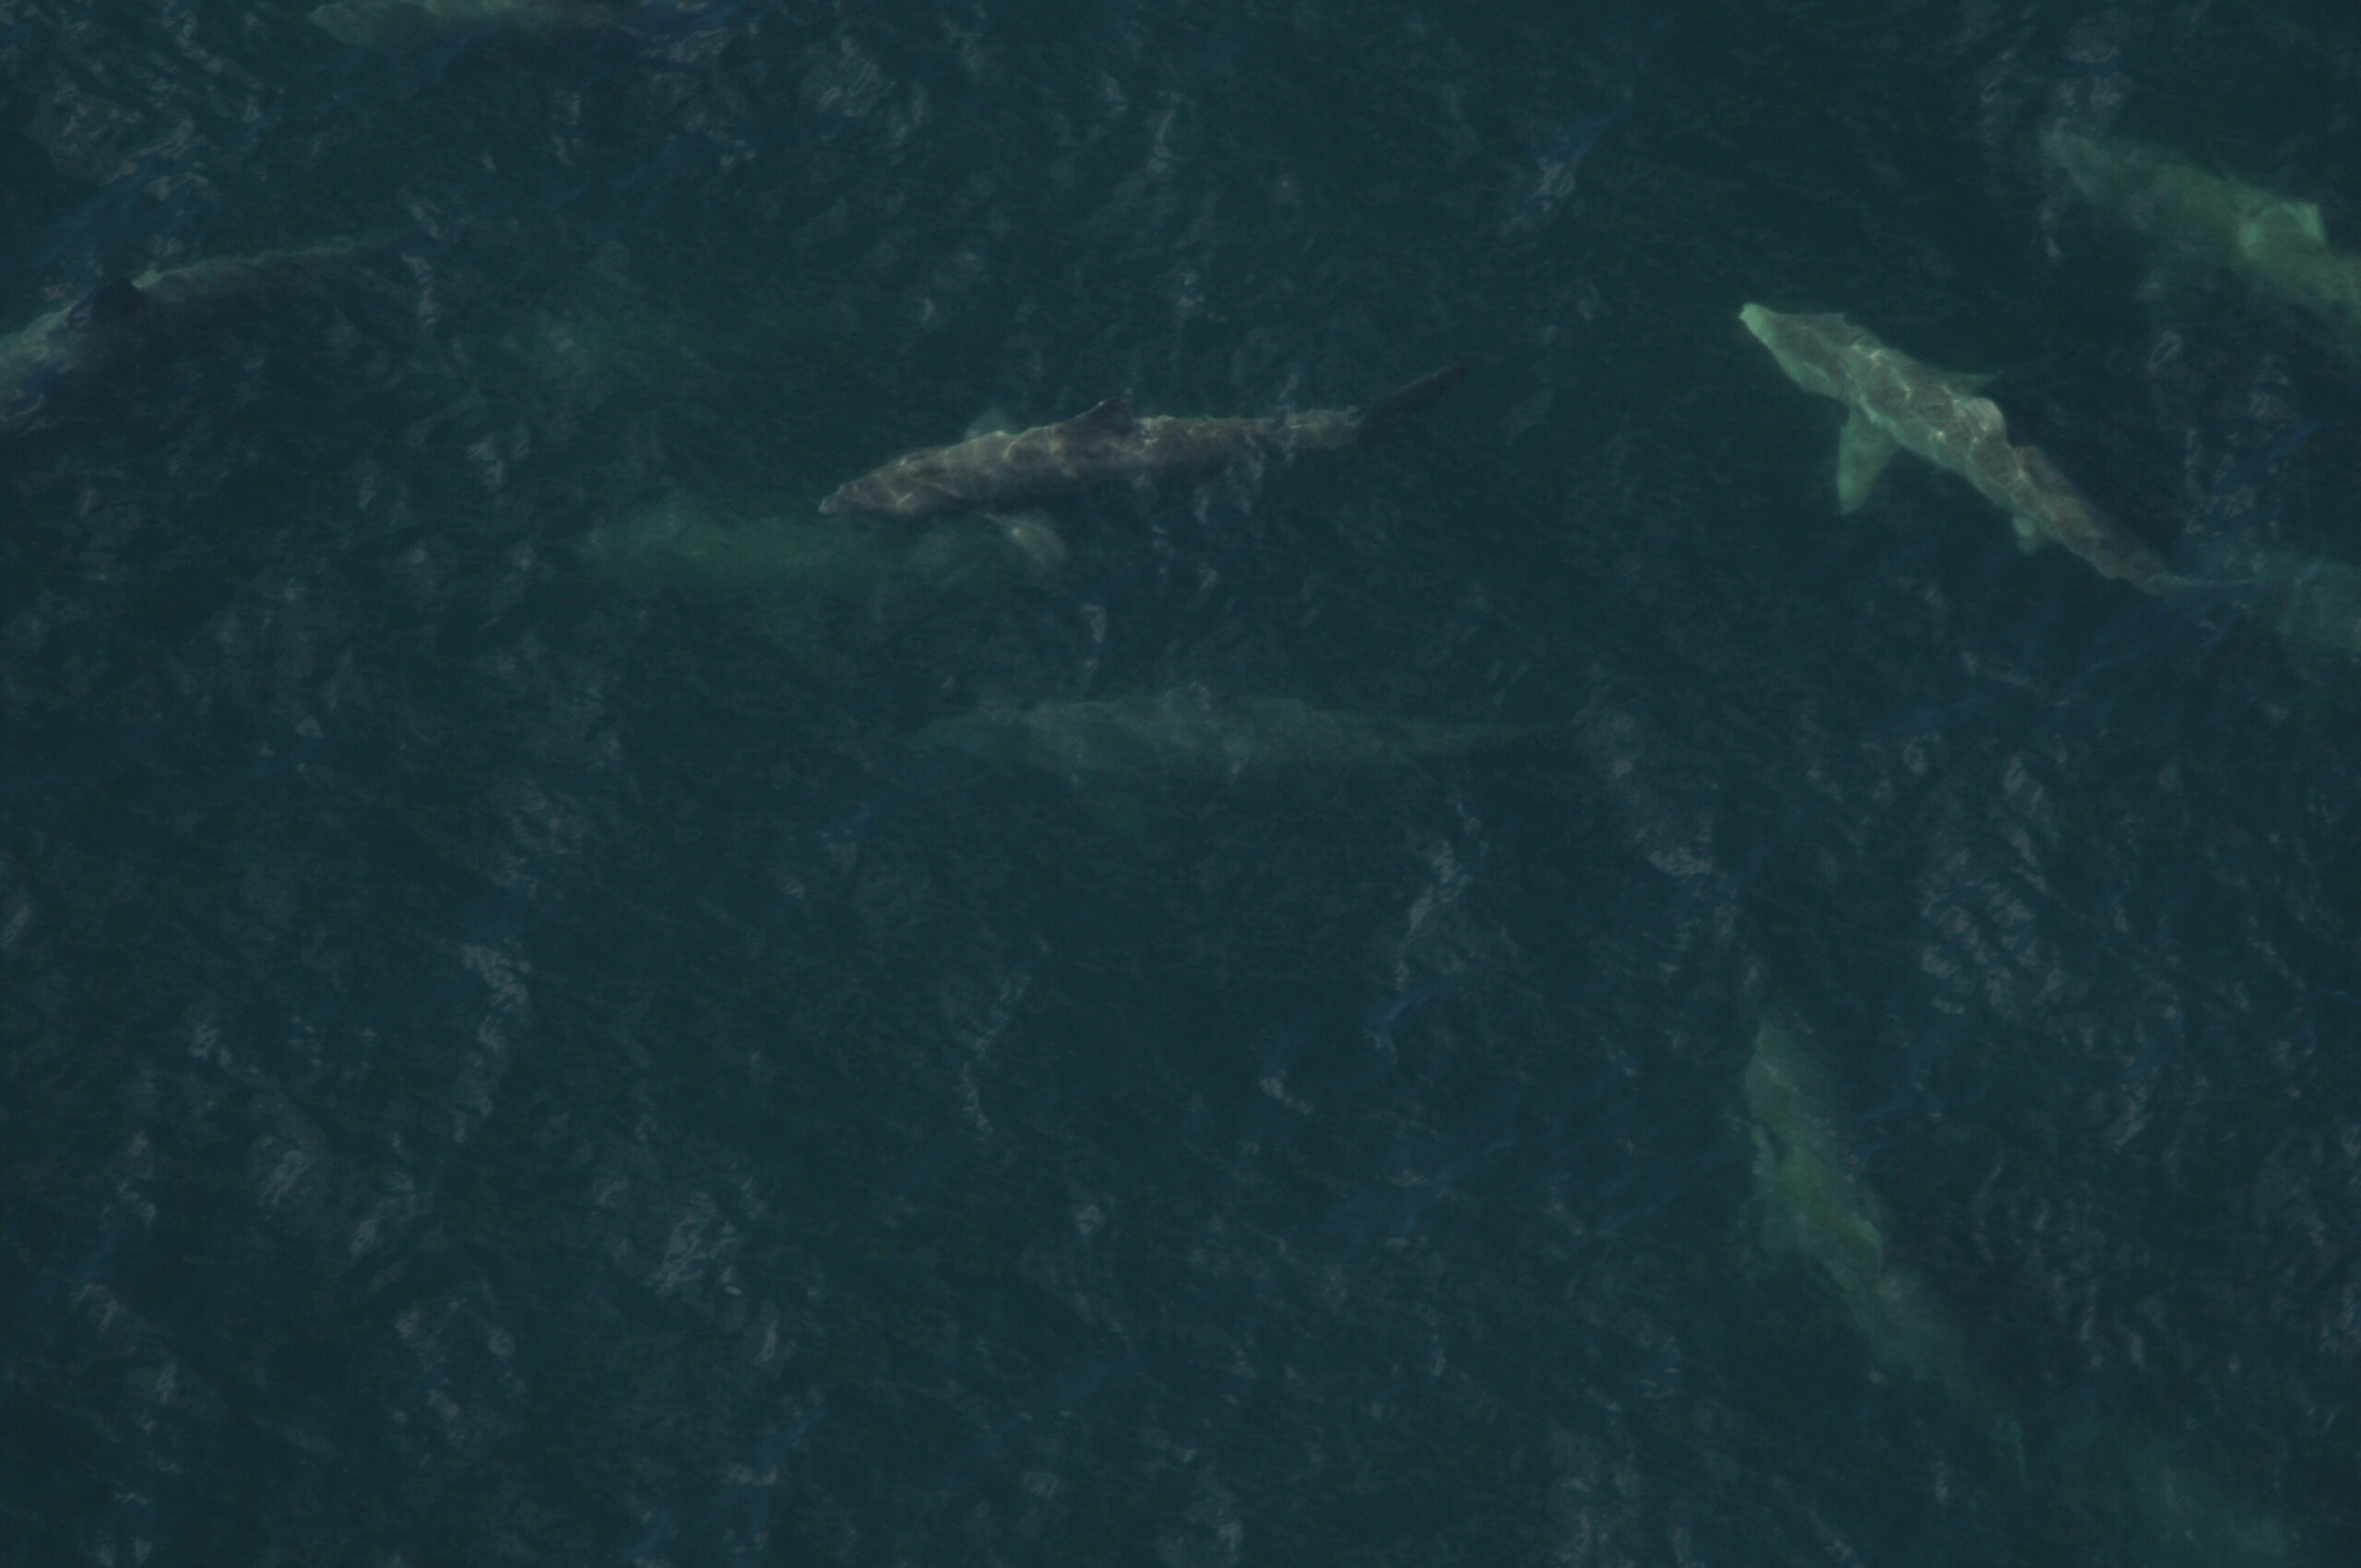 Basking sharks observed swimming in echelon formations in an aggregation ~1,400 strong